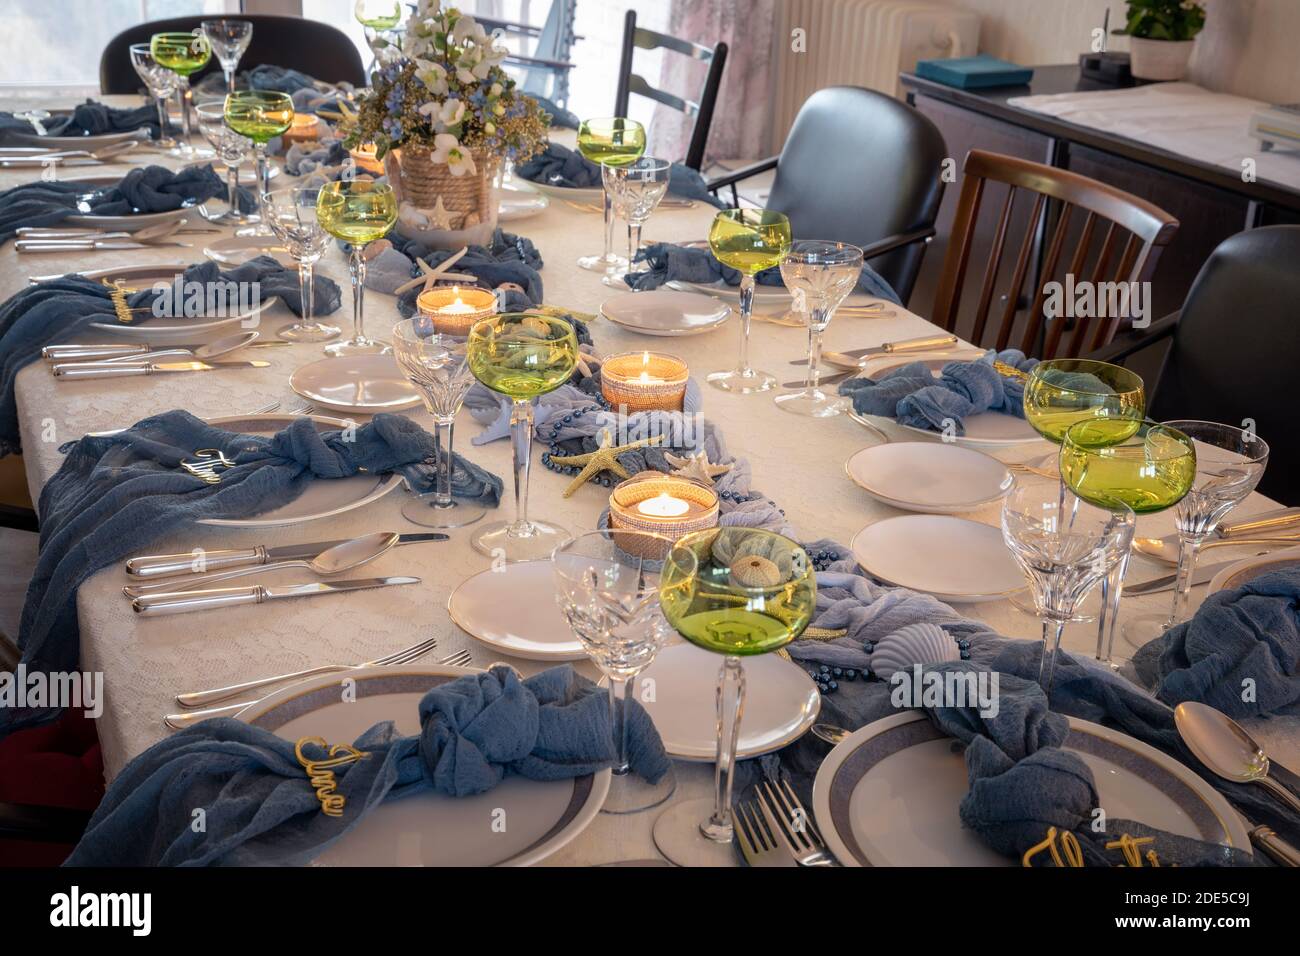 https://c8.alamy.com/comp/2DE5C9J/christmas-dinner-table-decorations-in-blues-and-gold-following-a-beach-theme-with-seashells-and-starfish-2DE5C9J.jpg